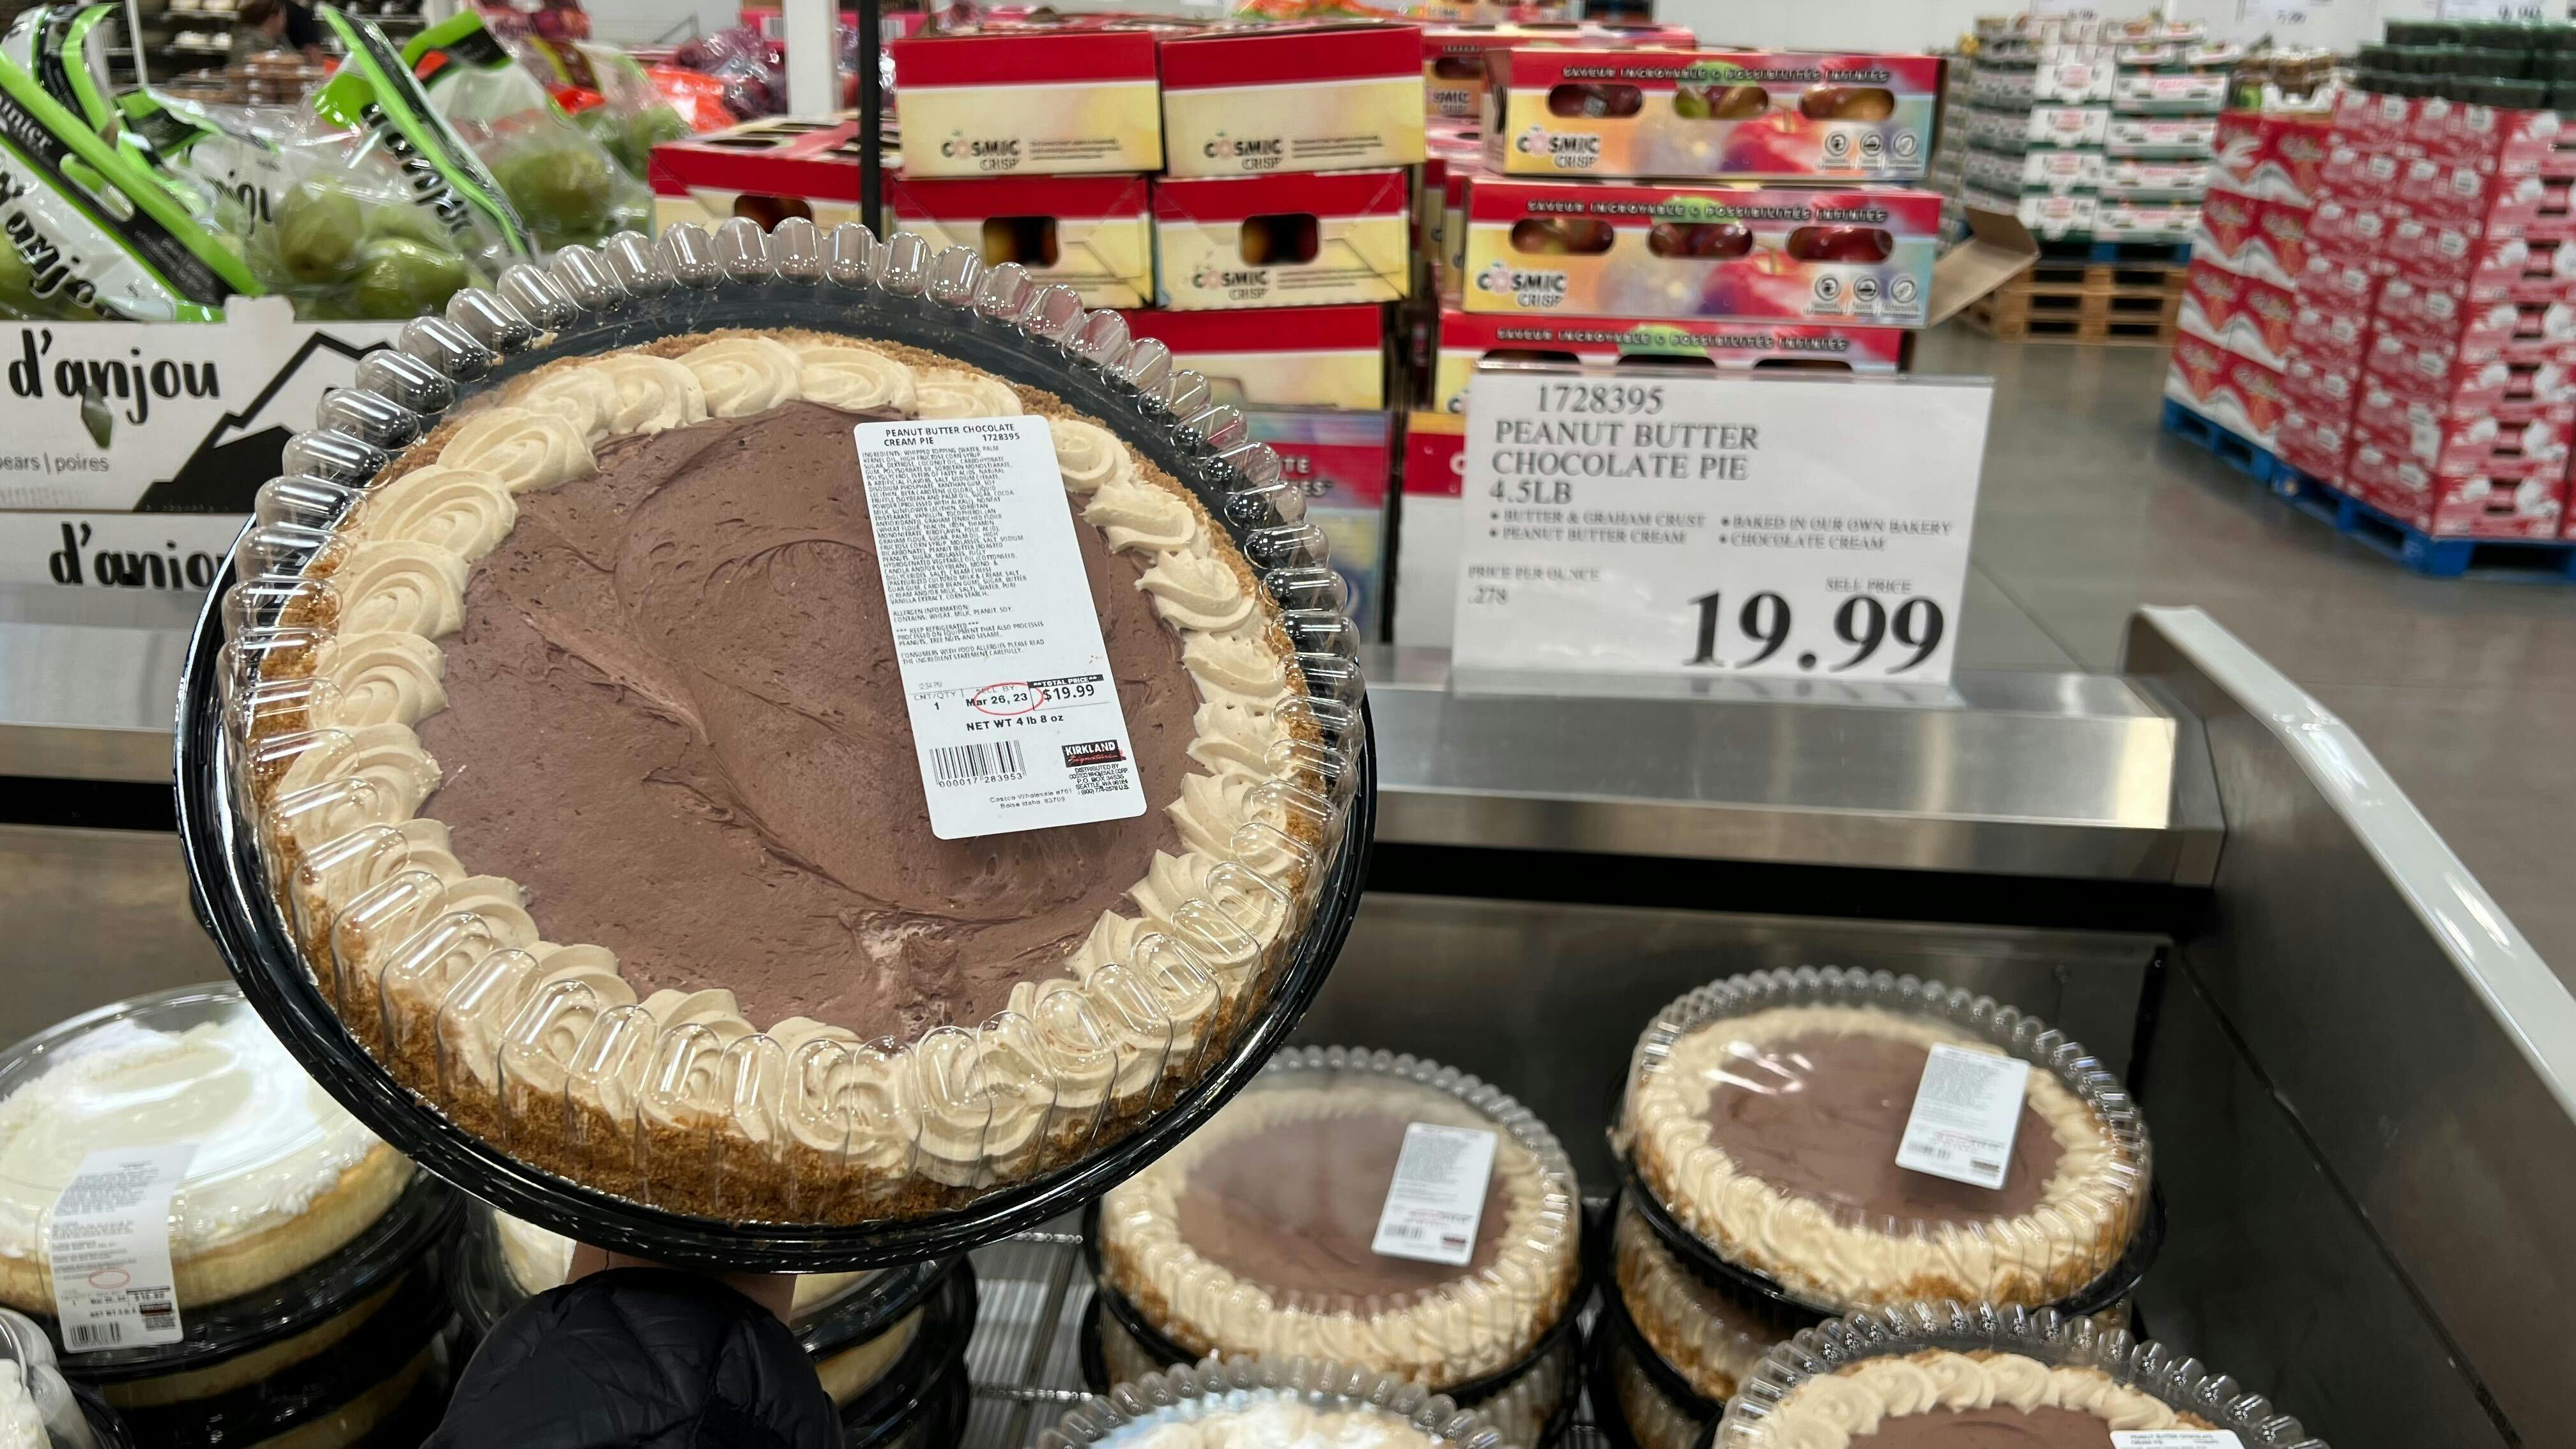 Penuat Butter pies at Costco